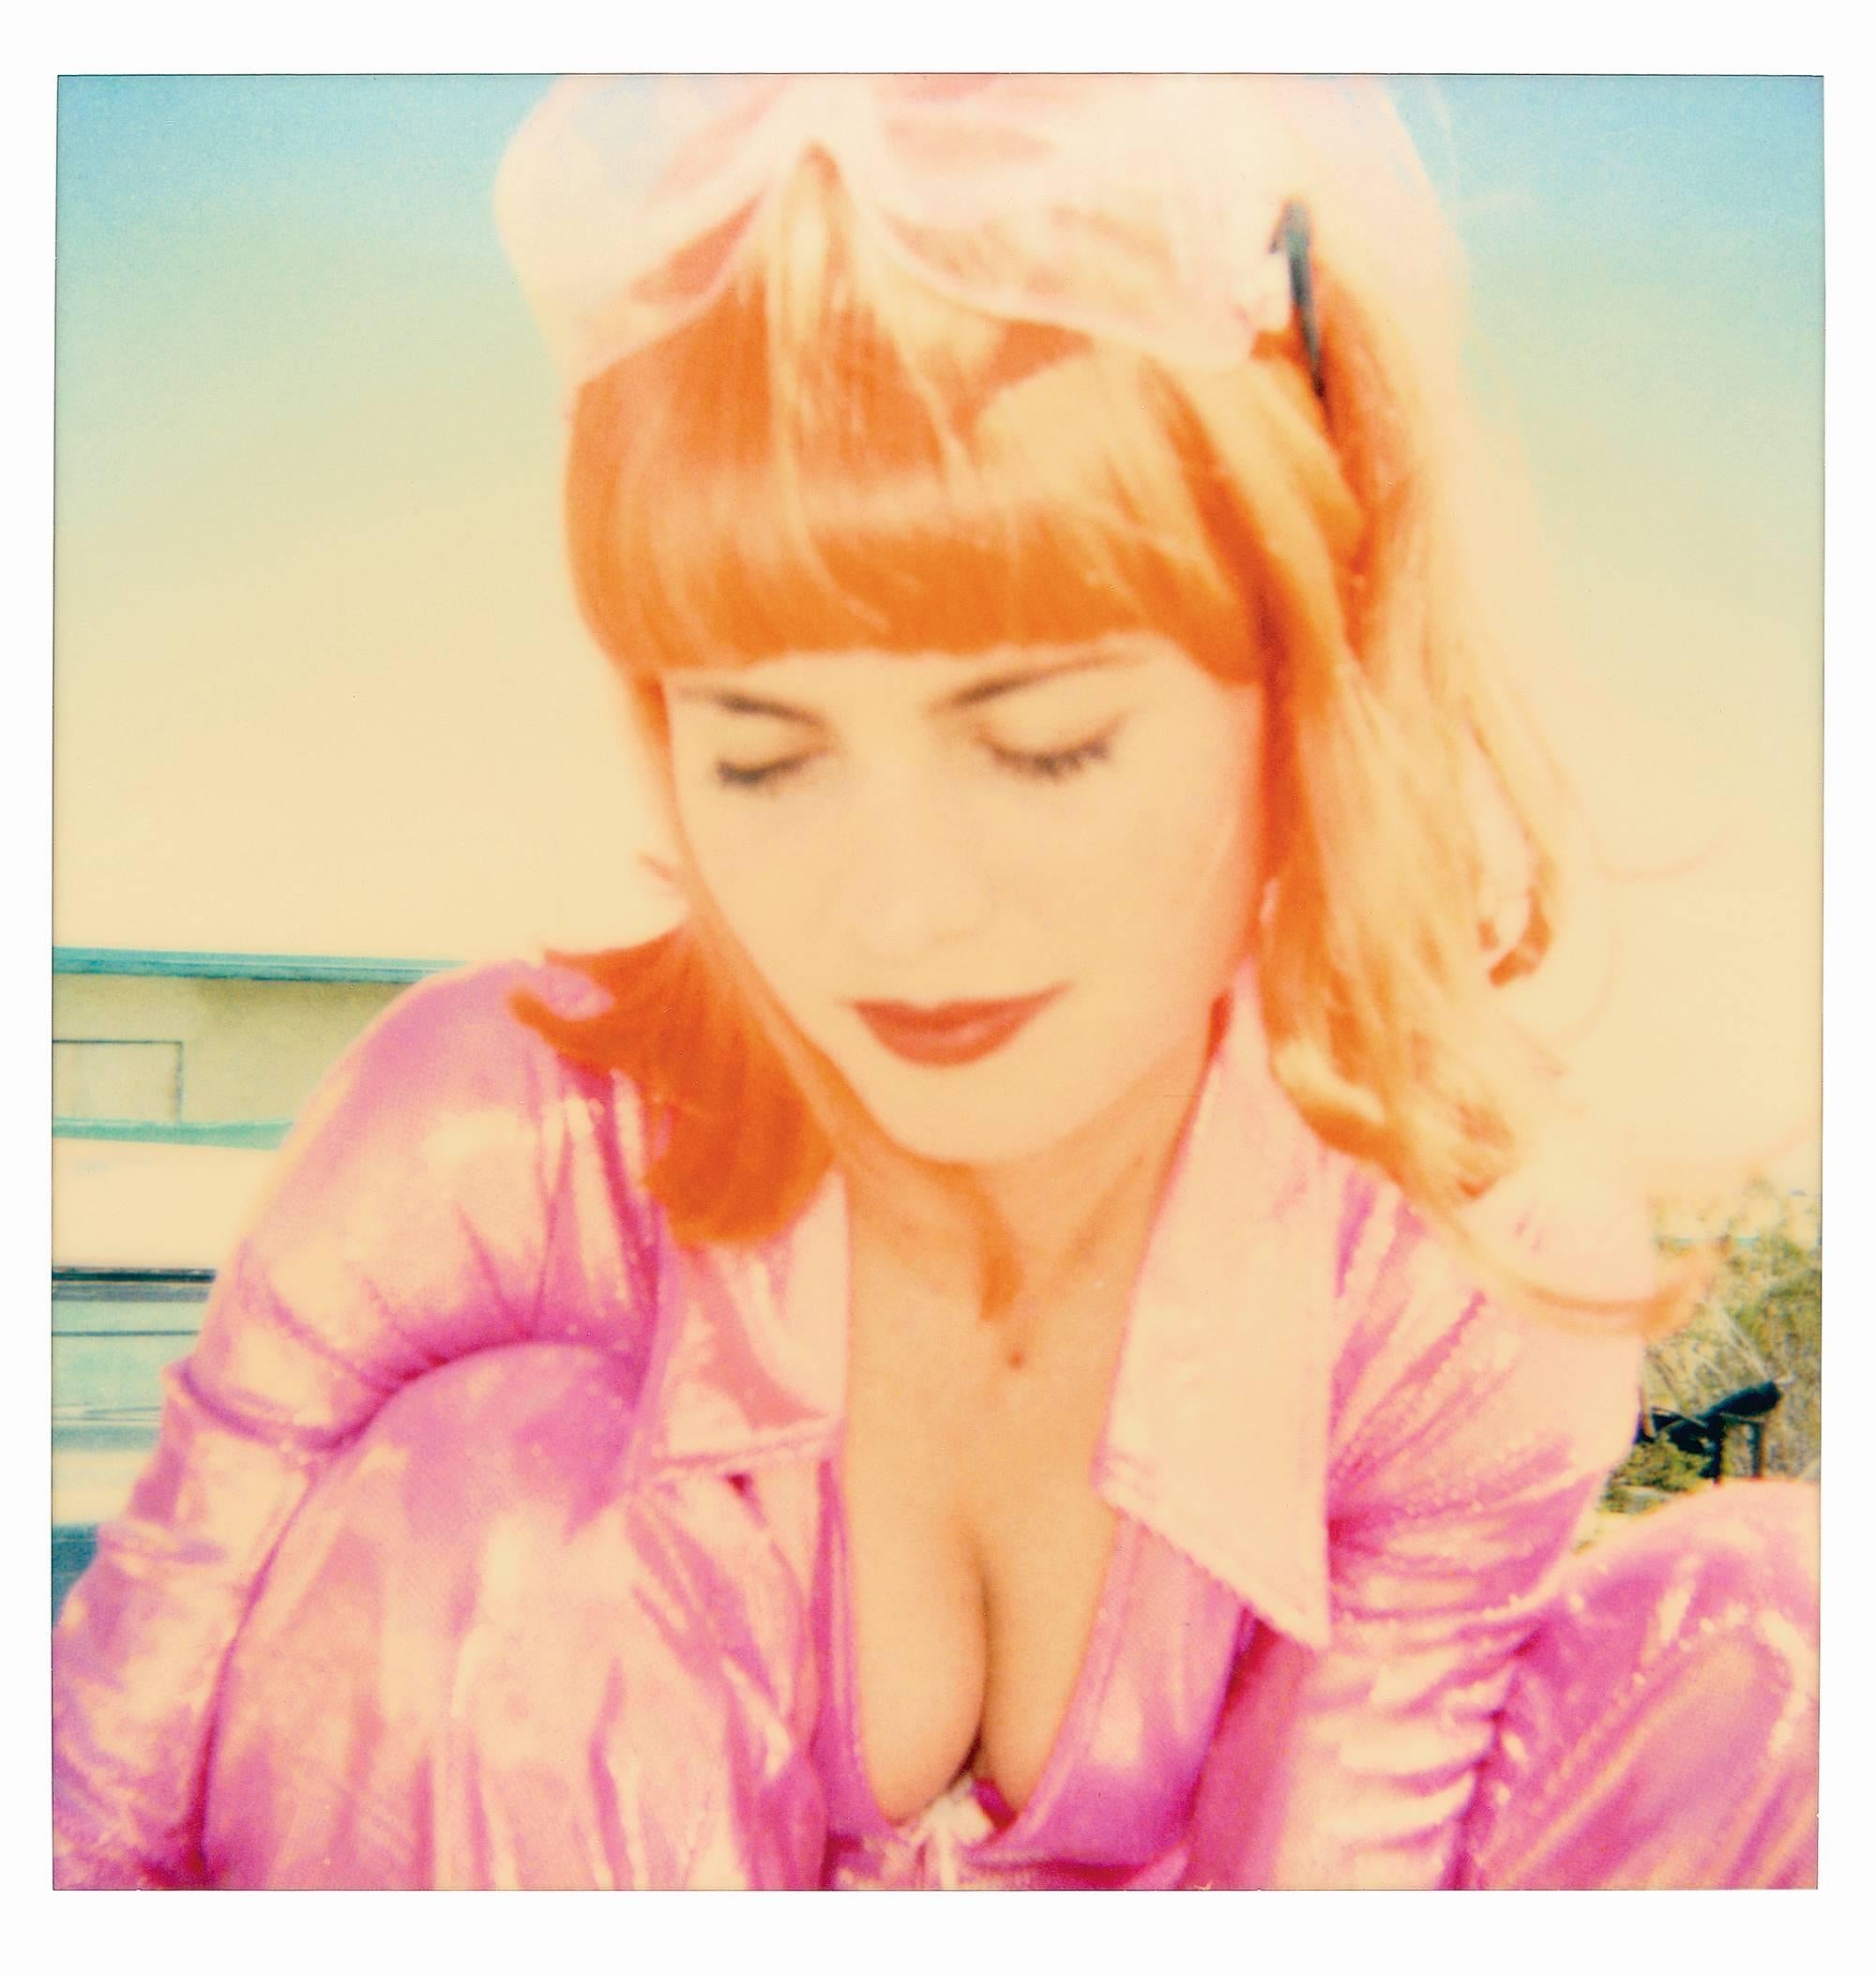 'Radha Pink' (29 Palms, CA) - 1999 

20x20cm, sold out Edition of 5, Artist Proof 2/2, 
digital C-Print print, based on a Polaroid, Certificate and Signature label, artist Inventory Nr. 616.39, 
Not mounted. Featuring Radha Mitchell.

Publications: